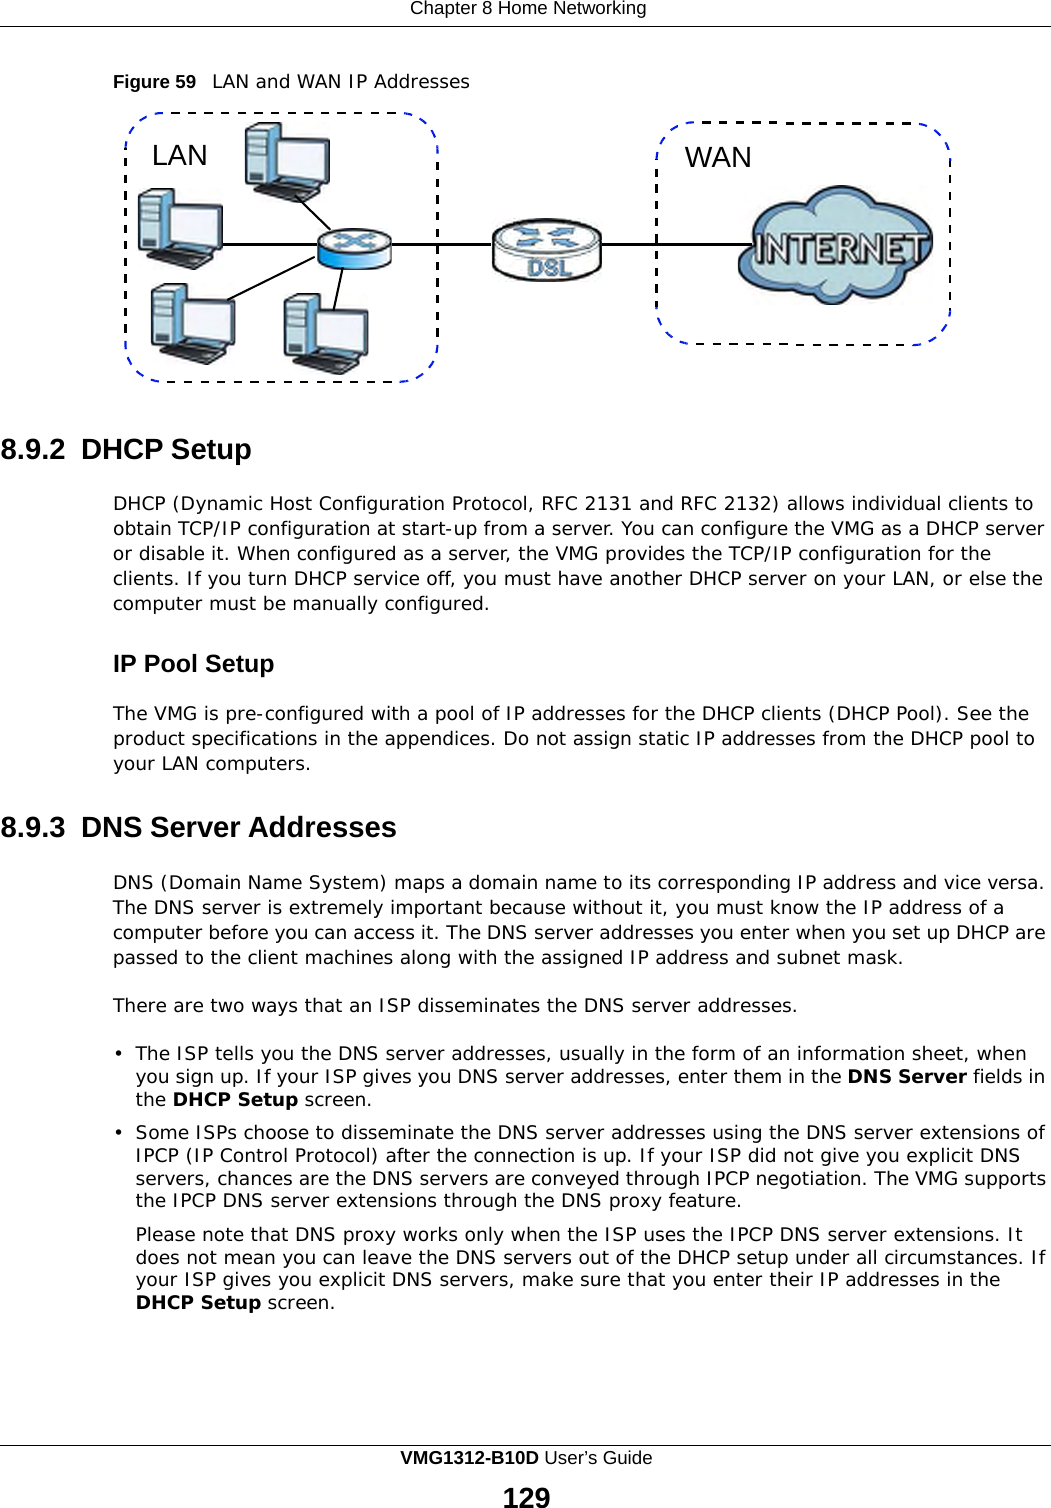 Chapter 8 Home Networking                  Figure 59   LAN and WAN IP Addresses   LAN WAN             8.9.2 DHCP Setup  DHCP (Dynamic Host Configuration Protocol, RFC 2131 and RFC 2132) allows individual clients to obtain TCP/IP configuration at start-up from a server. You can configure the VMG as a DHCP server or disable it. When configured as a server, the VMG provides the TCP/IP configuration for the clients. If you turn DHCP service off, you must have another DHCP server on your LAN, or else the computer must be manually configured.   IP Pool Setup  The VMG is pre-configured with a pool of IP addresses for the DHCP clients (DHCP Pool). See the product specifications in the appendices. Do not assign static IP addresses from the DHCP pool to your LAN computers.   8.9.3 DNS Server Addresses  DNS (Domain Name System) maps a domain name to its corresponding IP address and vice versa. The DNS server is extremely important because without it, you must know the IP address of a computer before you can access it. The DNS server addresses you enter when you set up DHCP are passed to the client machines along with the assigned IP address and subnet mask.  There are two ways that an ISP disseminates the DNS server addresses.  •  The ISP tells you the DNS server addresses, usually in the form of an information sheet, when you sign up. If your ISP gives you DNS server addresses, enter them in the DNS Server fields in the DHCP Setup screen.  •  Some ISPs choose to disseminate the DNS server addresses using the DNS server extensions of IPCP (IP Control Protocol) after the connection is up. If your ISP did not give you explicit DNS servers, chances are the DNS servers are conveyed through IPCP negotiation. The VMG supports the IPCP DNS server extensions through the DNS proxy feature. Please note that DNS proxy works only when the ISP uses the IPCP DNS server extensions. It does not mean you can leave the DNS servers out of the DHCP setup under all circumstances. If your ISP gives you explicit DNS servers, make sure that you enter their IP addresses in the DHCP Setup screen. VMG1312-B10D User’s Guide  129  